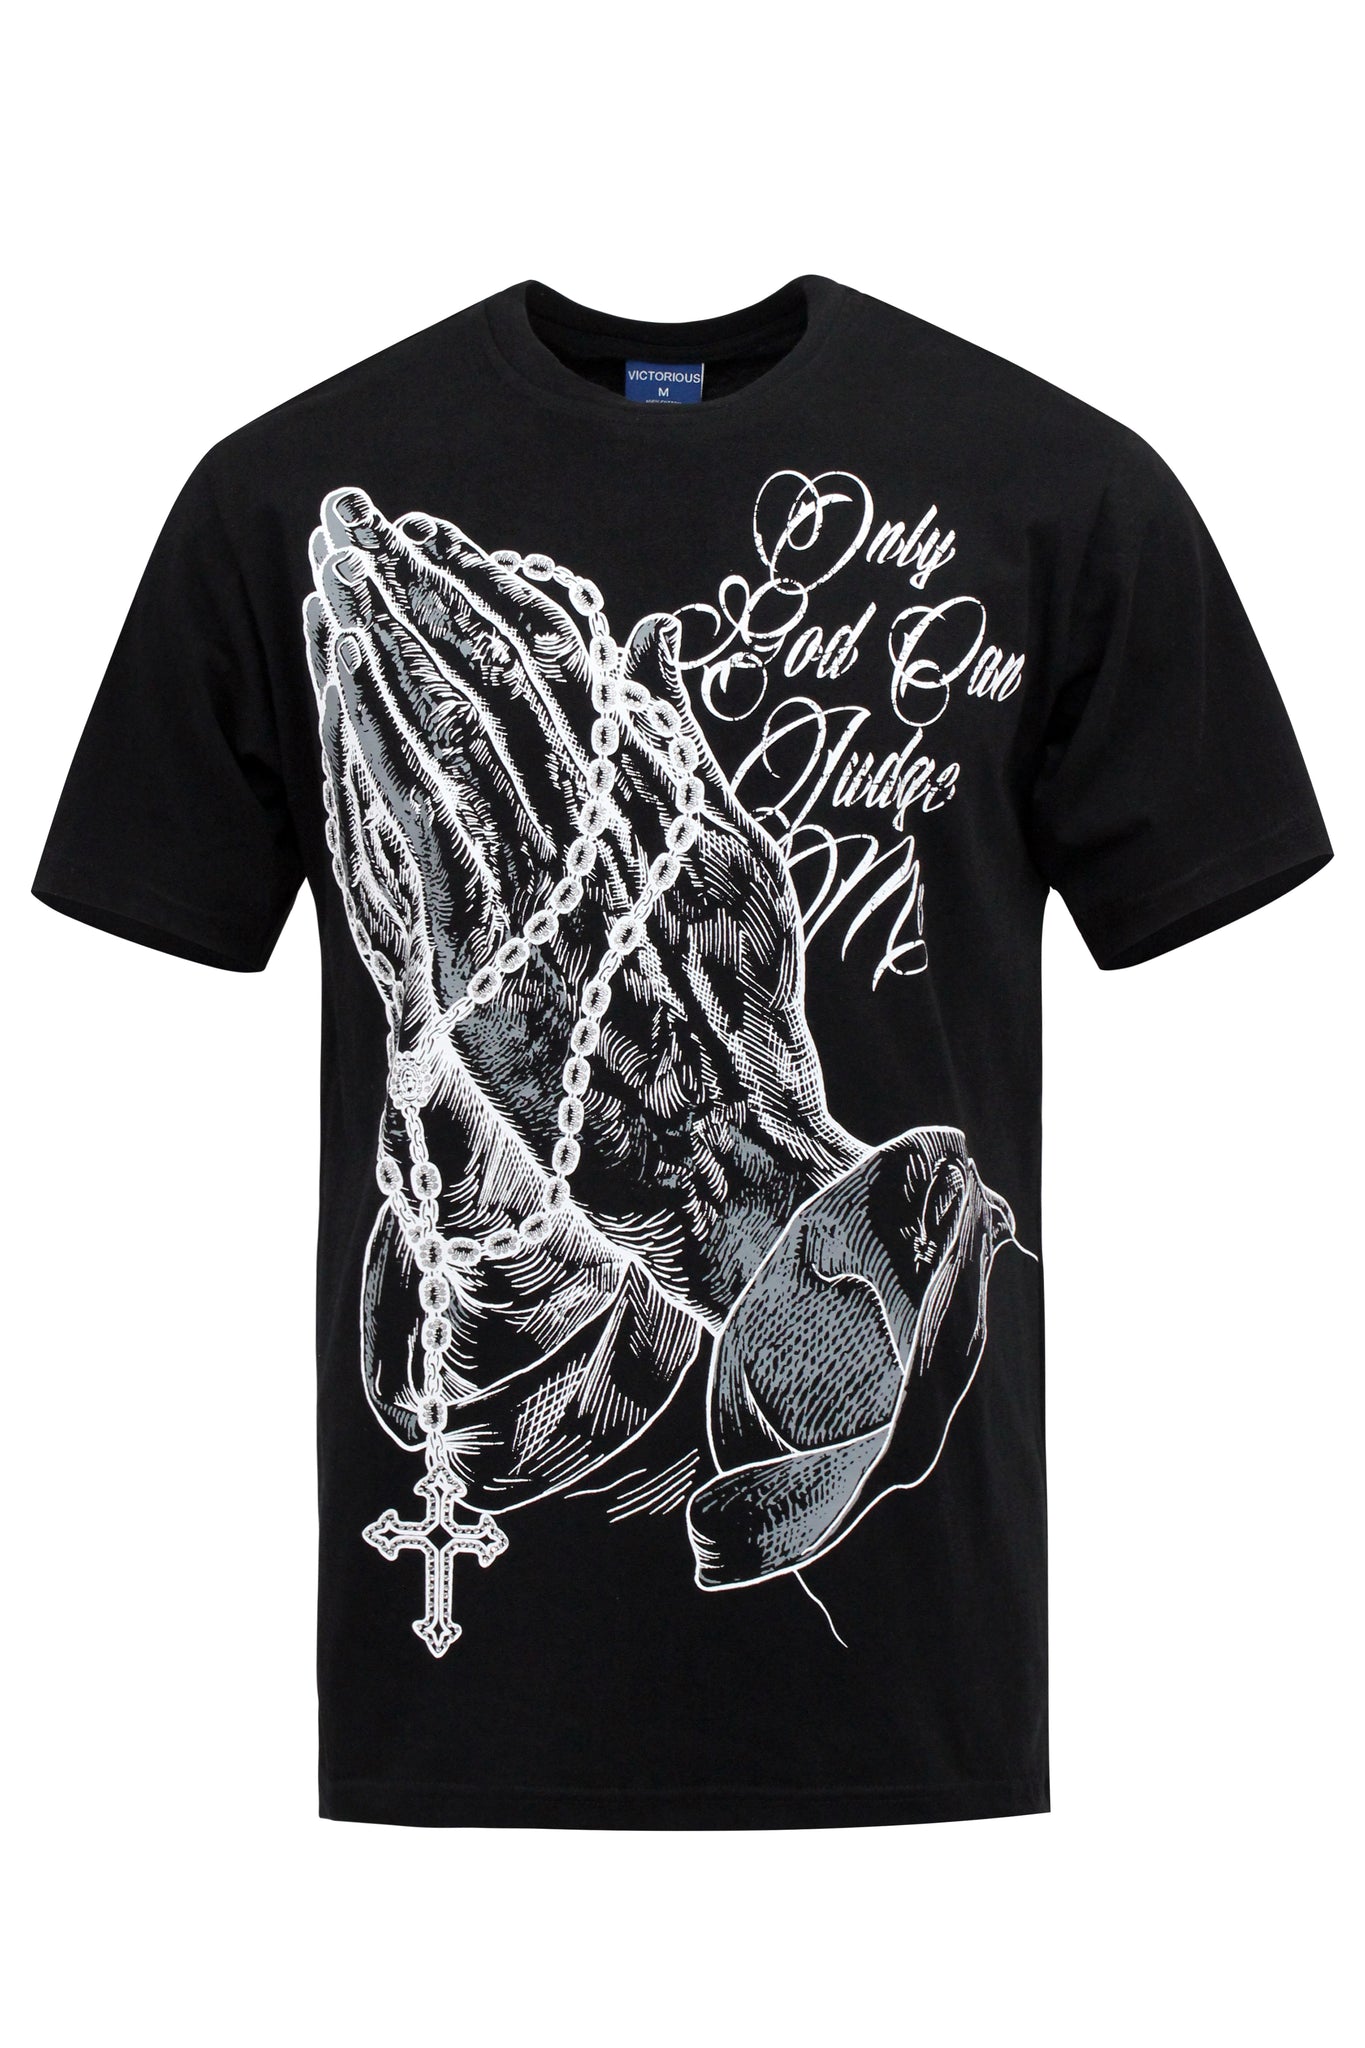 Only God Can Judge Me T-shirts